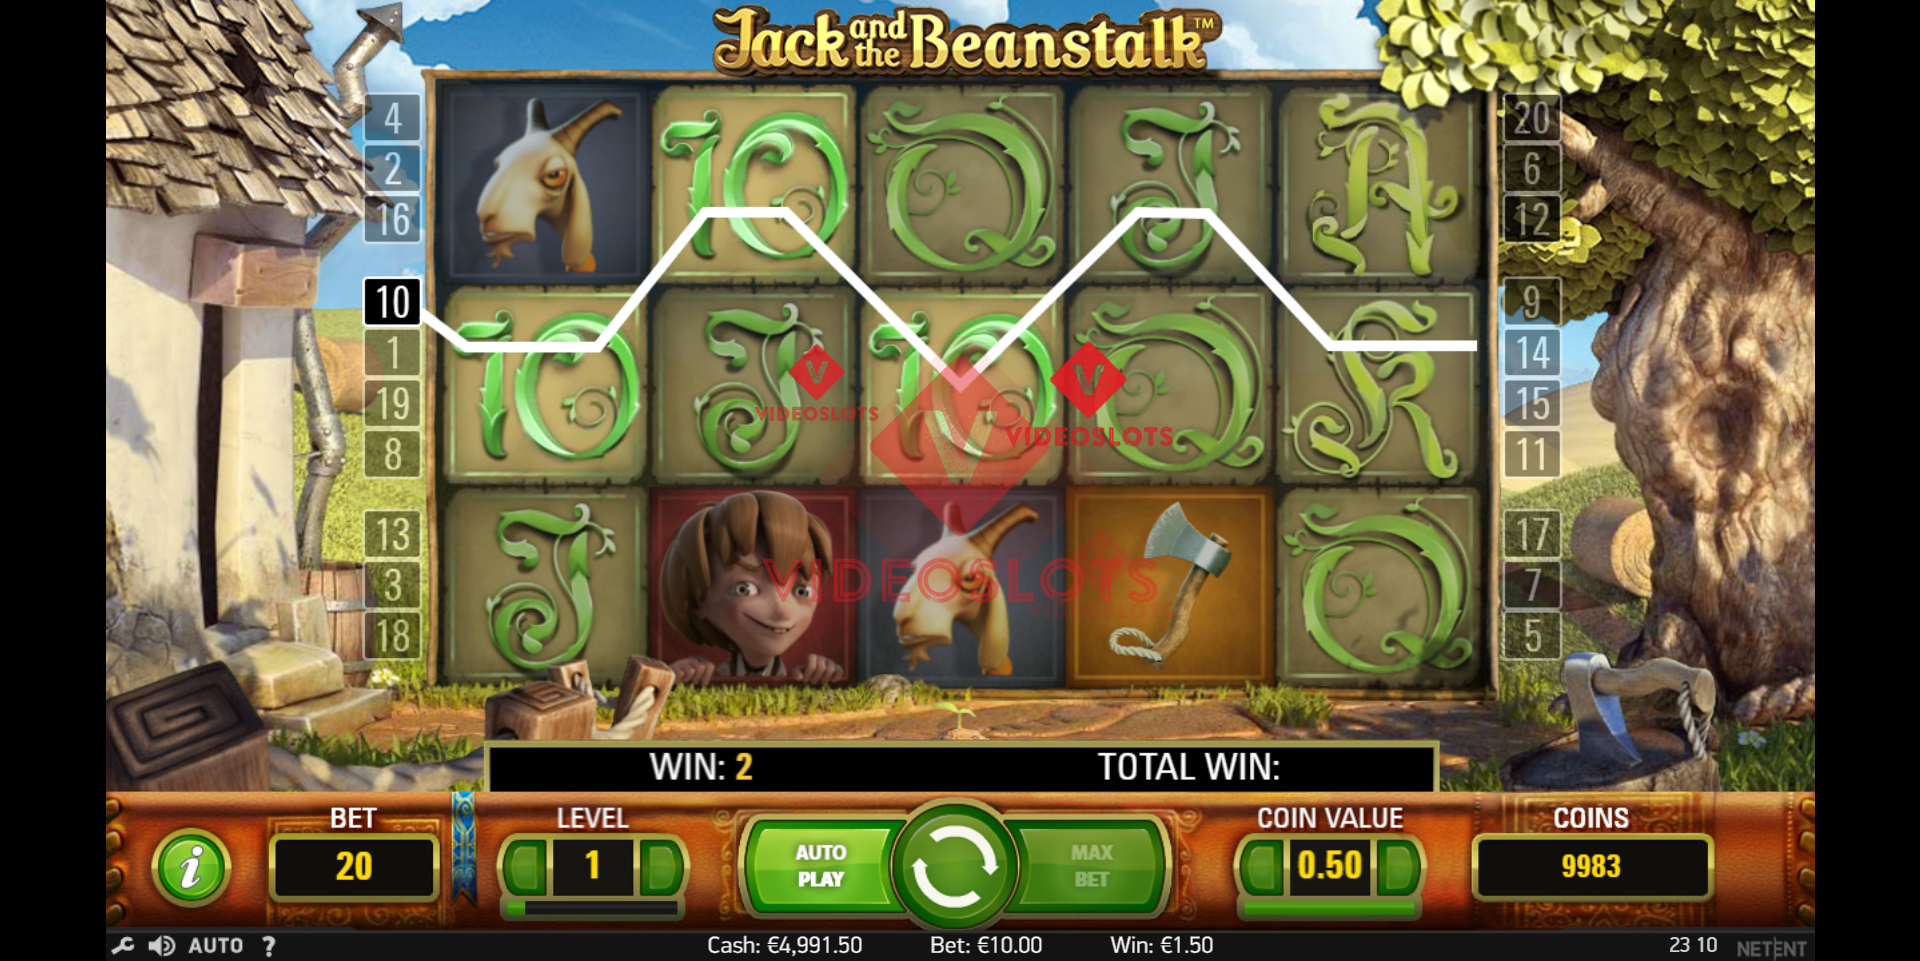 Base Game for Jack and the Beanstalk slot from NetEnt